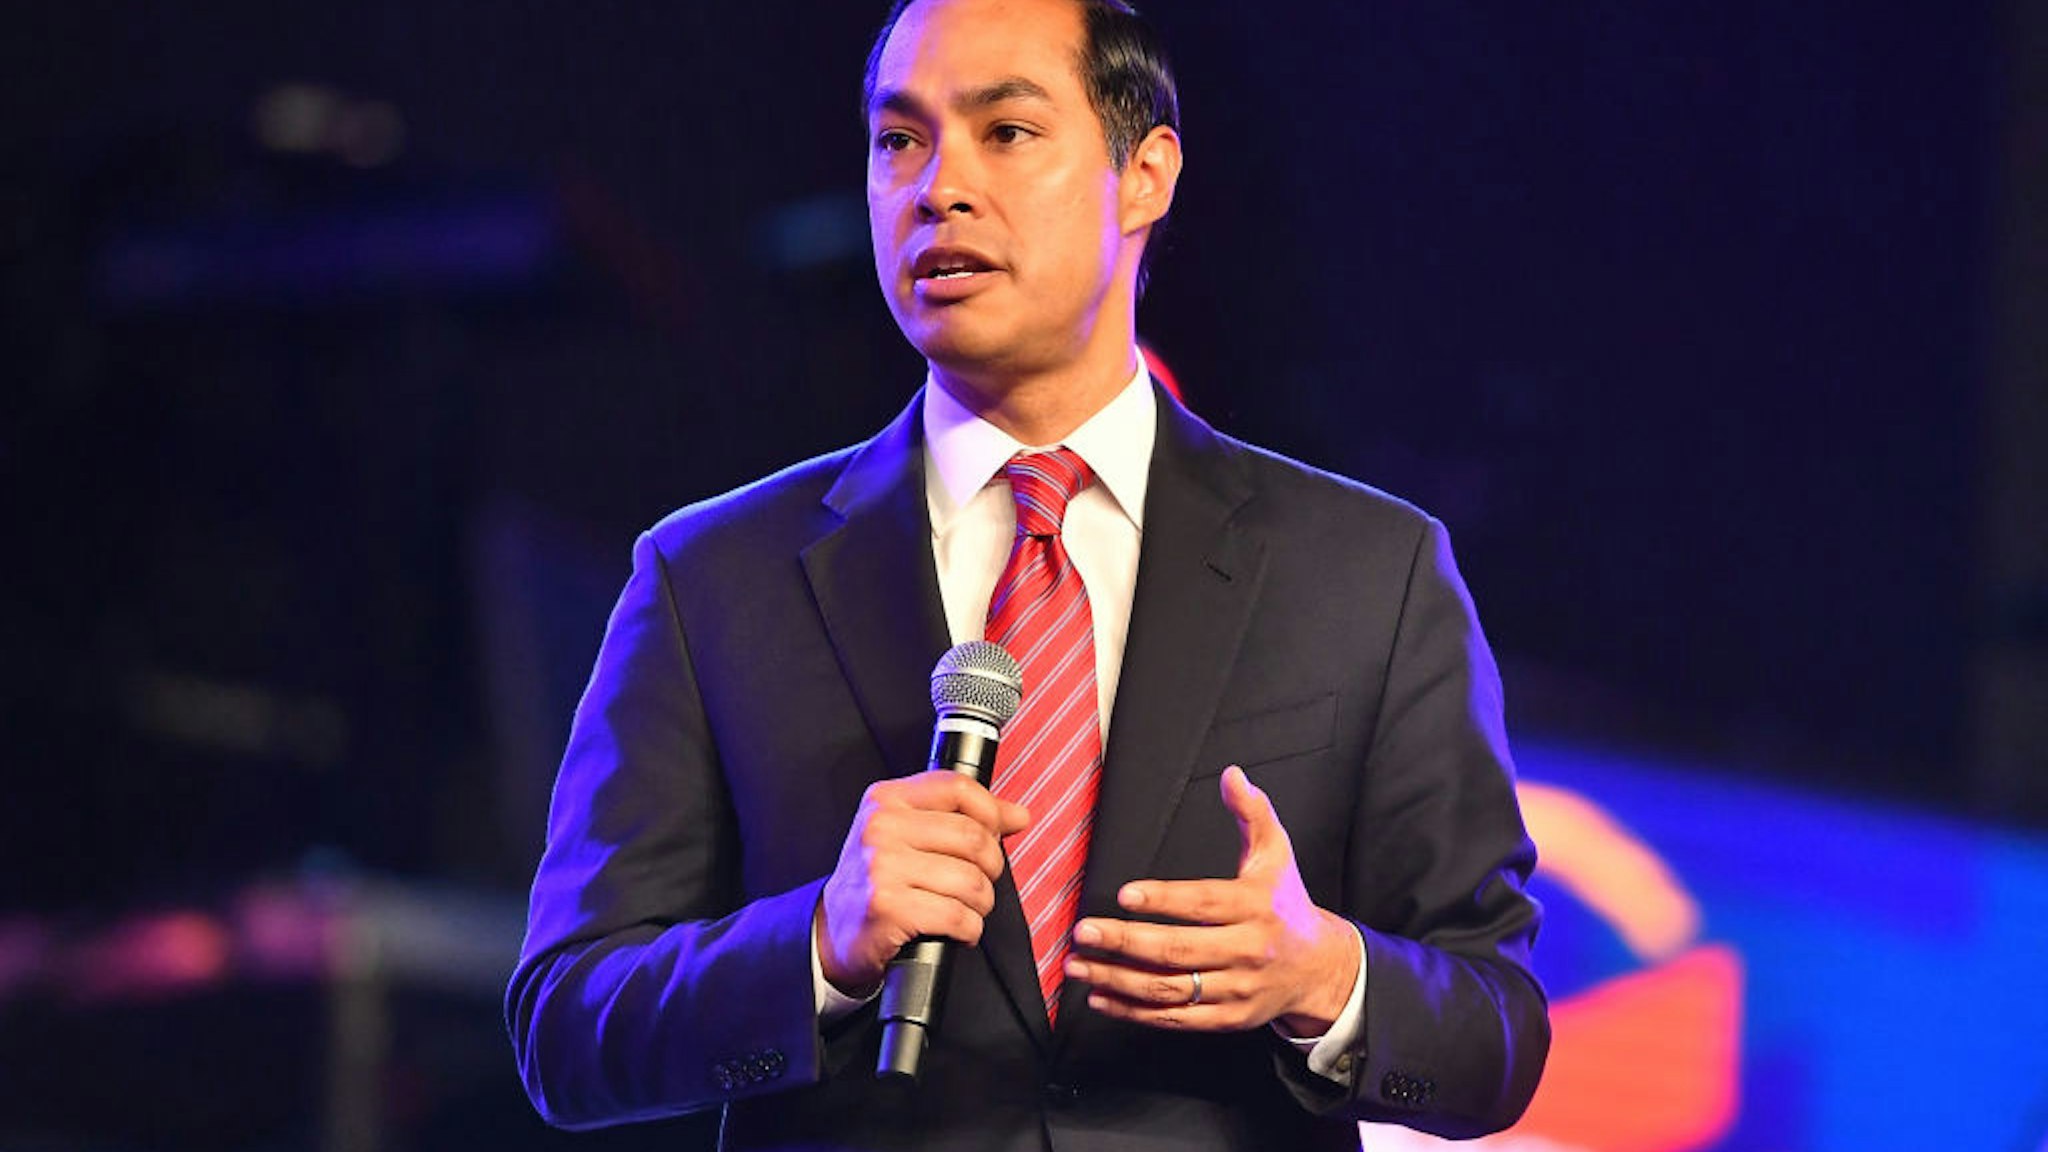 Julian Castro speaks on stage during Young Leaders Conference 2019 - 2020 Presidential Candidates Forum.